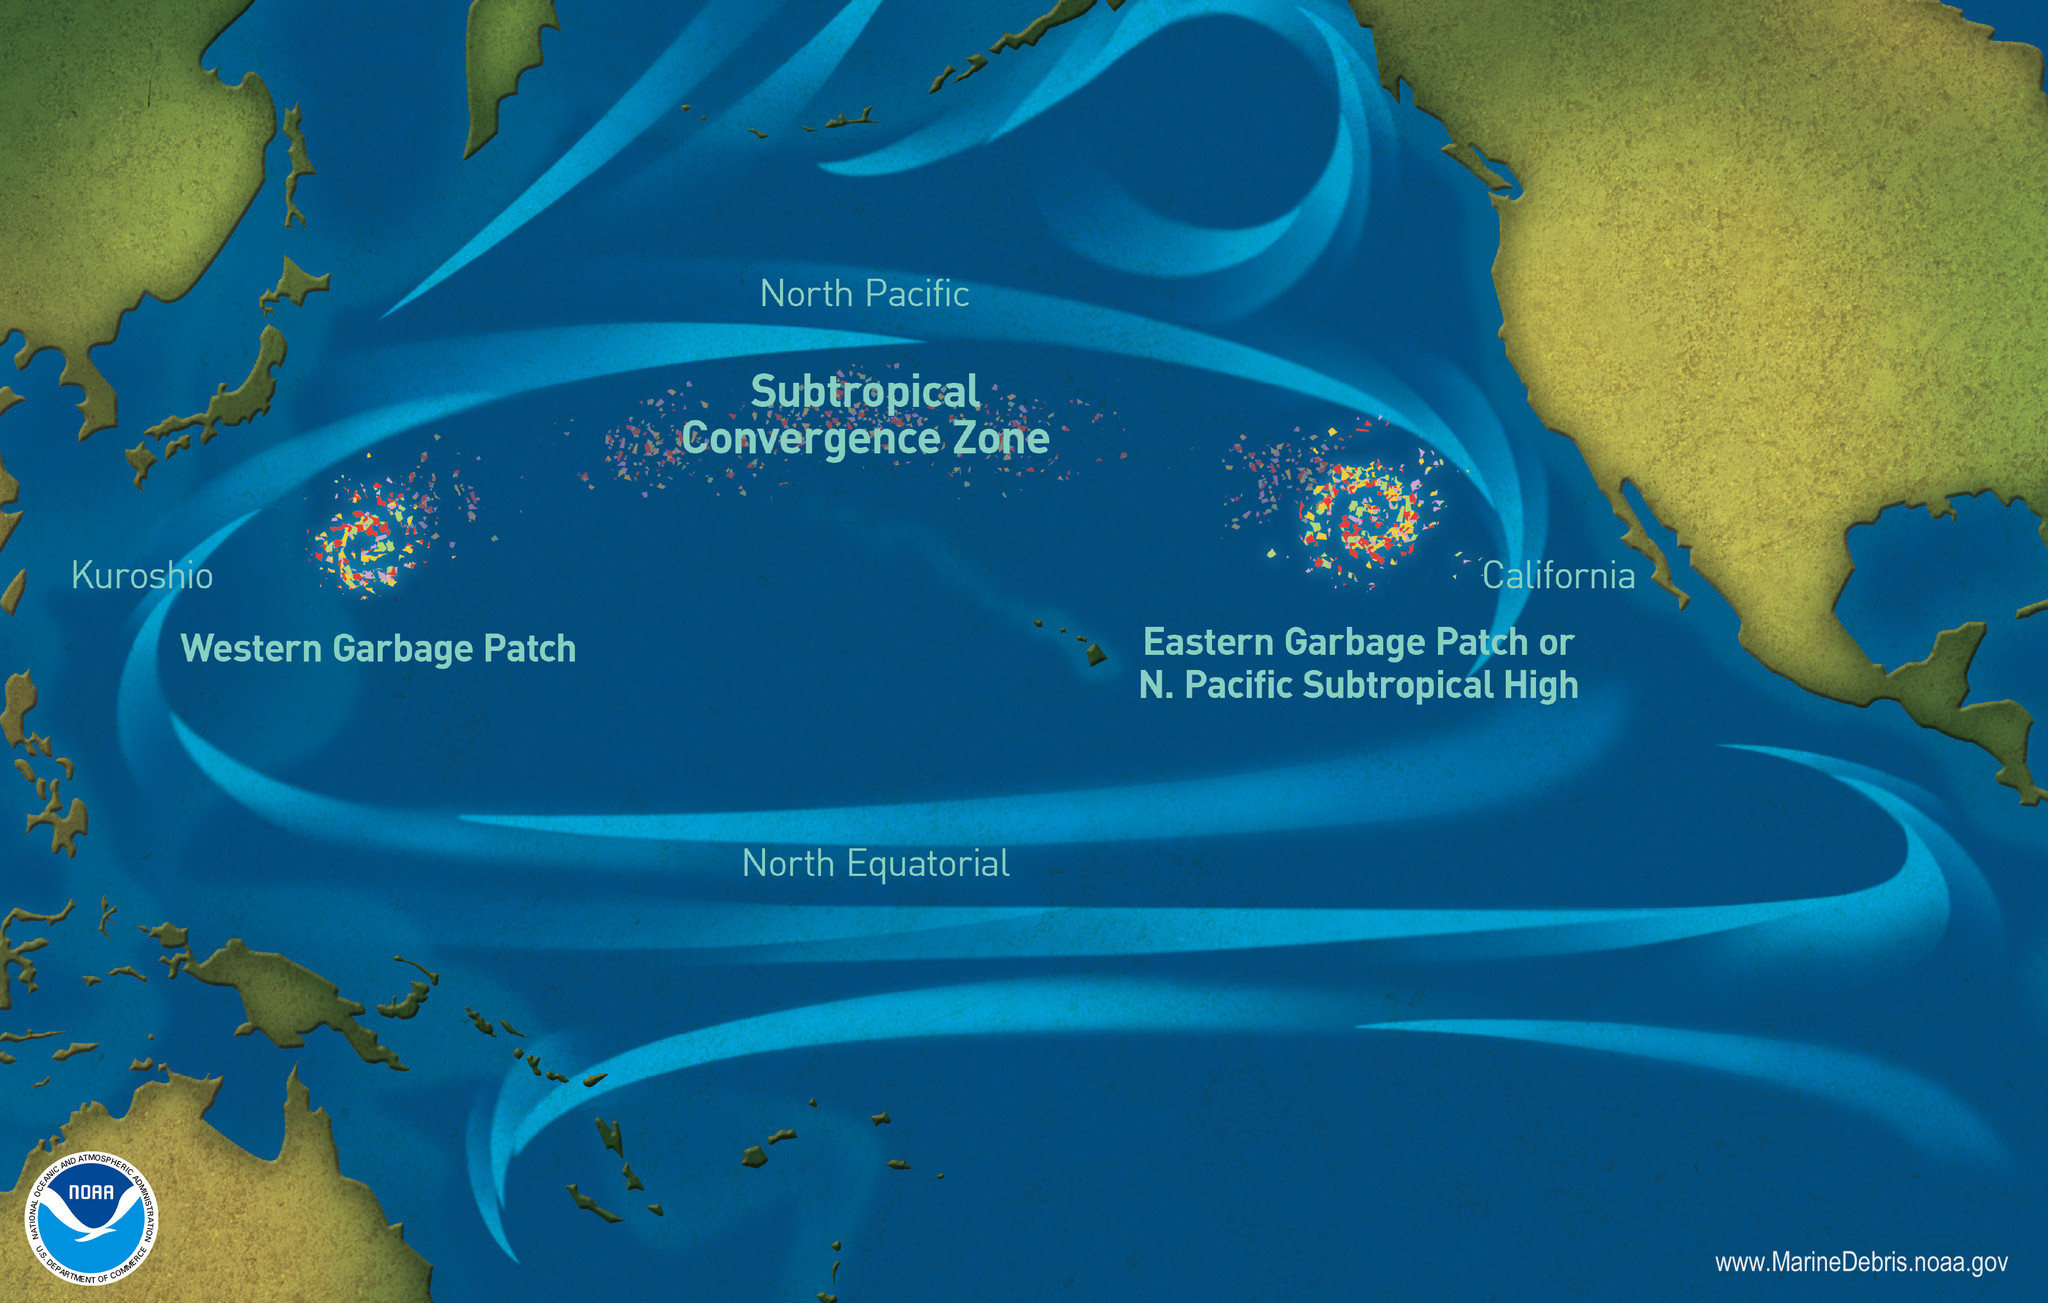 What exactly is the Great Pacific Garbage Patch off the coast of